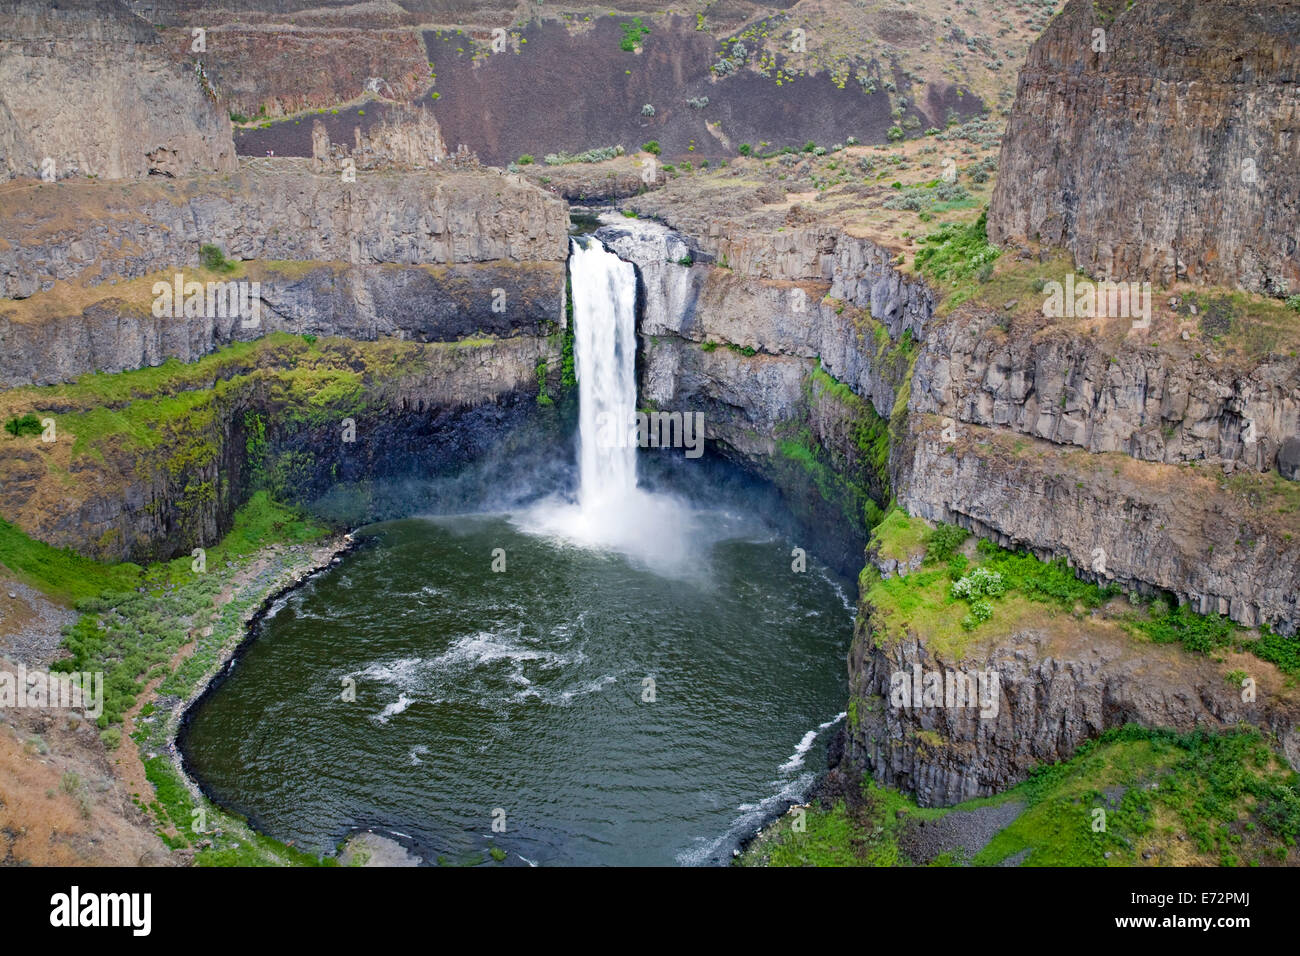 A view of Palouse Falls, a waterfall on the Palouse River in eastern Washington Stock Photo